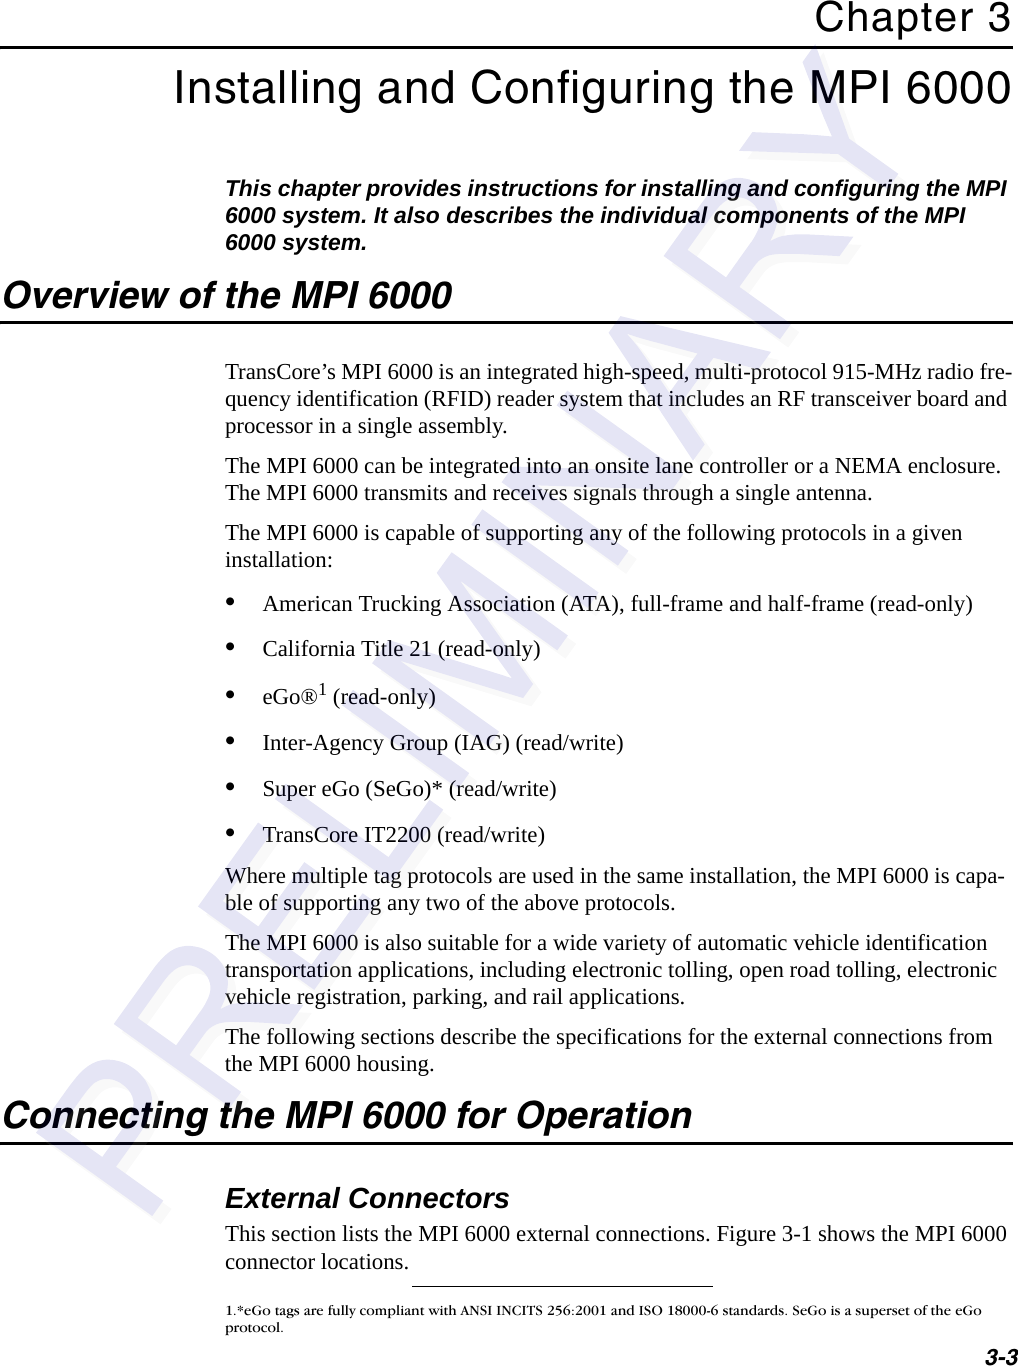 3-3Chapter 3Installing and Configuring the MPI 6000This chapter provides instructions for installing and configuring the MPI 6000 system. It also describes the individual components of the MPI 6000 system.Overview of the MPI 6000TransCore’s MPI 6000 is an integrated high-speed, multi-protocol 915-MHz radio fre-quency identification (RFID) reader system that includes an RF transceiver board and processor in a single assembly.The MPI 6000 can be integrated into an onsite lane controller or a NEMA enclosure. The MPI 6000 transmits and receives signals through a single antenna.The MPI 6000 is capable of supporting any of the following protocols in a given installation:•American Trucking Association (ATA), full-frame and half-frame (read-only)•California Title 21 (read-only)•eGo®1 (read-only)•Inter-Agency Group (IAG) (read/write)•Super eGo (SeGo)* (read/write)•TransCore IT2200 (read/write)Where multiple tag protocols are used in the same installation, the MPI 6000 is capa-ble of supporting any two of the above protocols.The MPI 6000 is also suitable for a wide variety of automatic vehicle identification transportation applications, including electronic tolling, open road tolling, electronic vehicle registration, parking, and rail applications.The following sections describe the specifications for the external connections from the MPI 6000 housing.Connecting the MPI 6000 for OperationExternal ConnectorsThis section lists the MPI 6000 external connections. Figure 3-1 shows the MPI 6000 connector locations.1.*eGo tags are fully compliant with ANSI INCITS 256:2001 and ISO 18000-6 standards. SeGo is a superset of the eGo protocol.